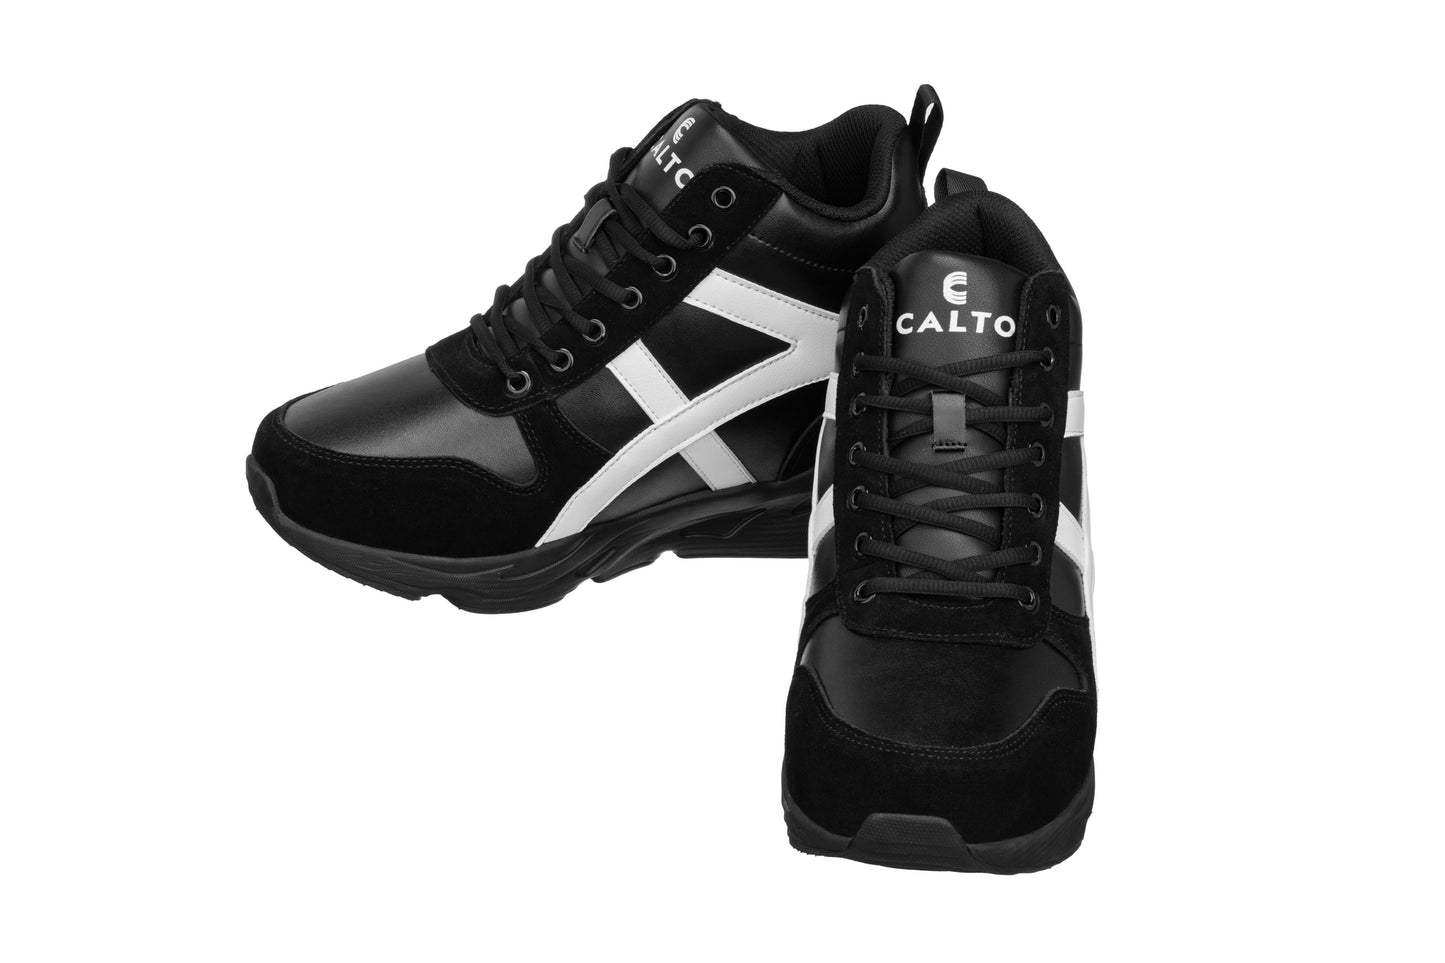 Elevator shoes height increase CALTO - S22783 - 3.6 Inches Taller (Black/White) - Hiking Style Boots